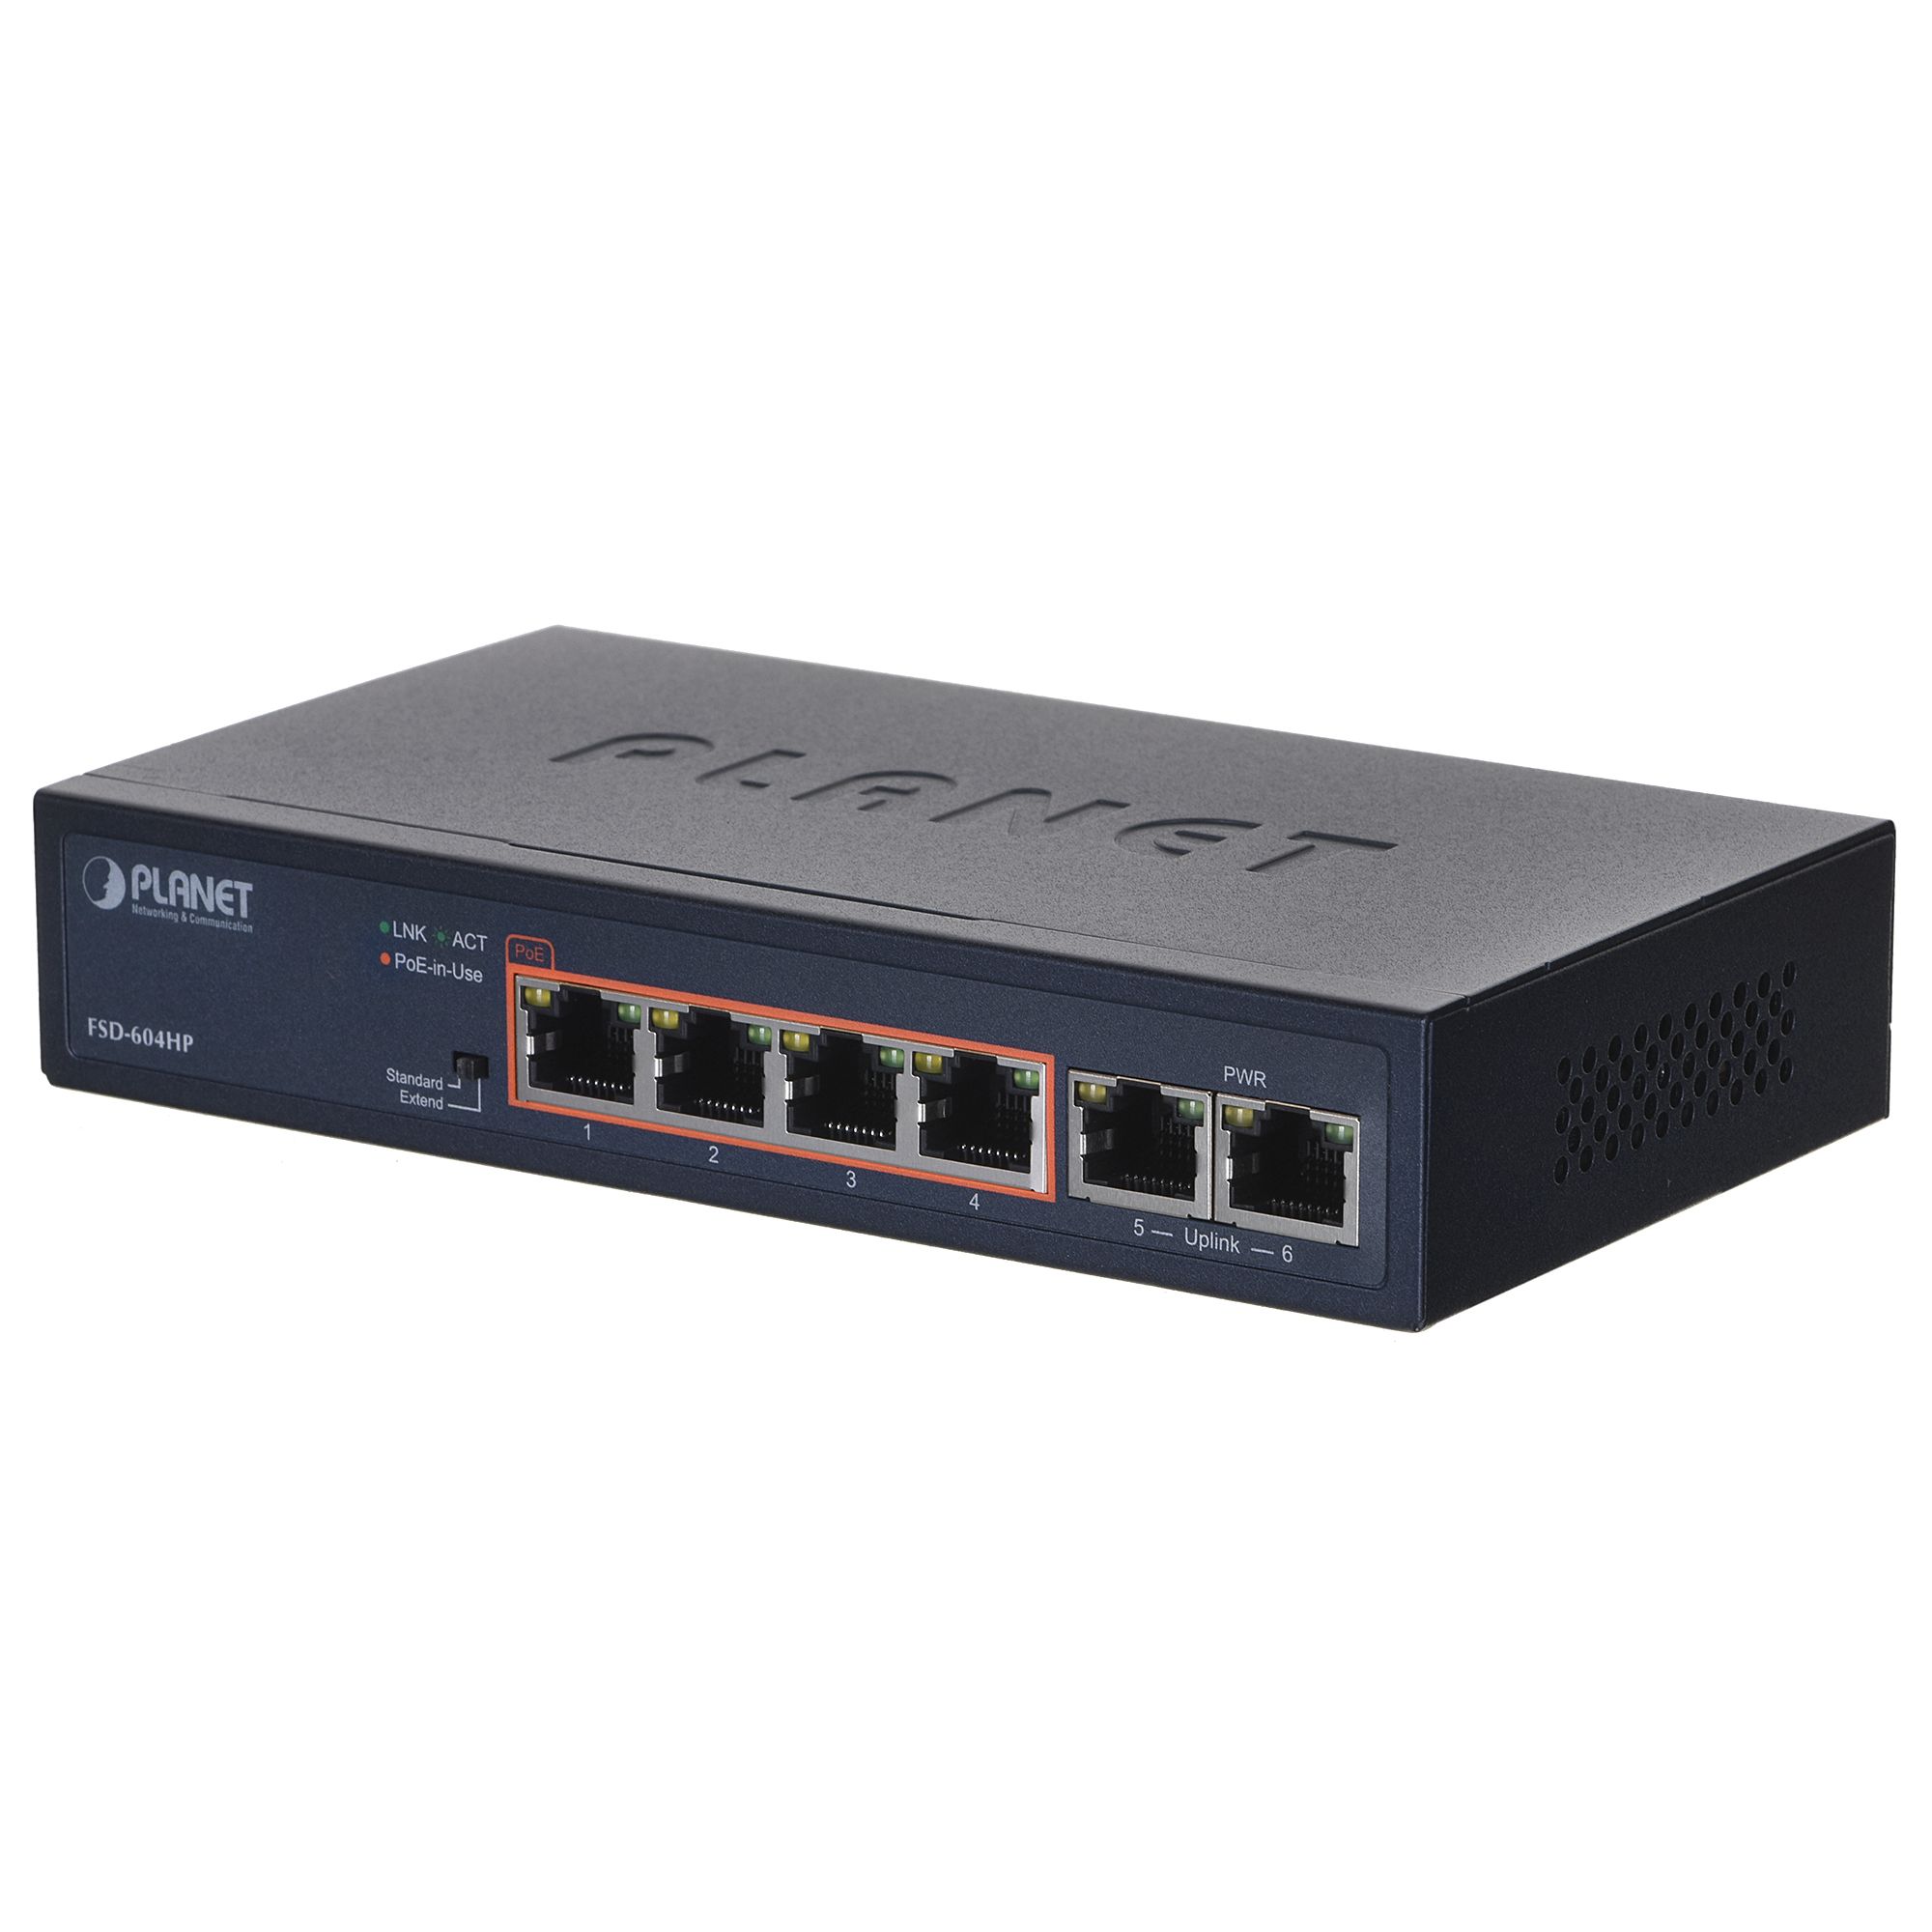 PLANET FSD-604HP network switch Unmanaged Fast Ethernet (10/100) Power over Ethernet (PoE) Blue_1